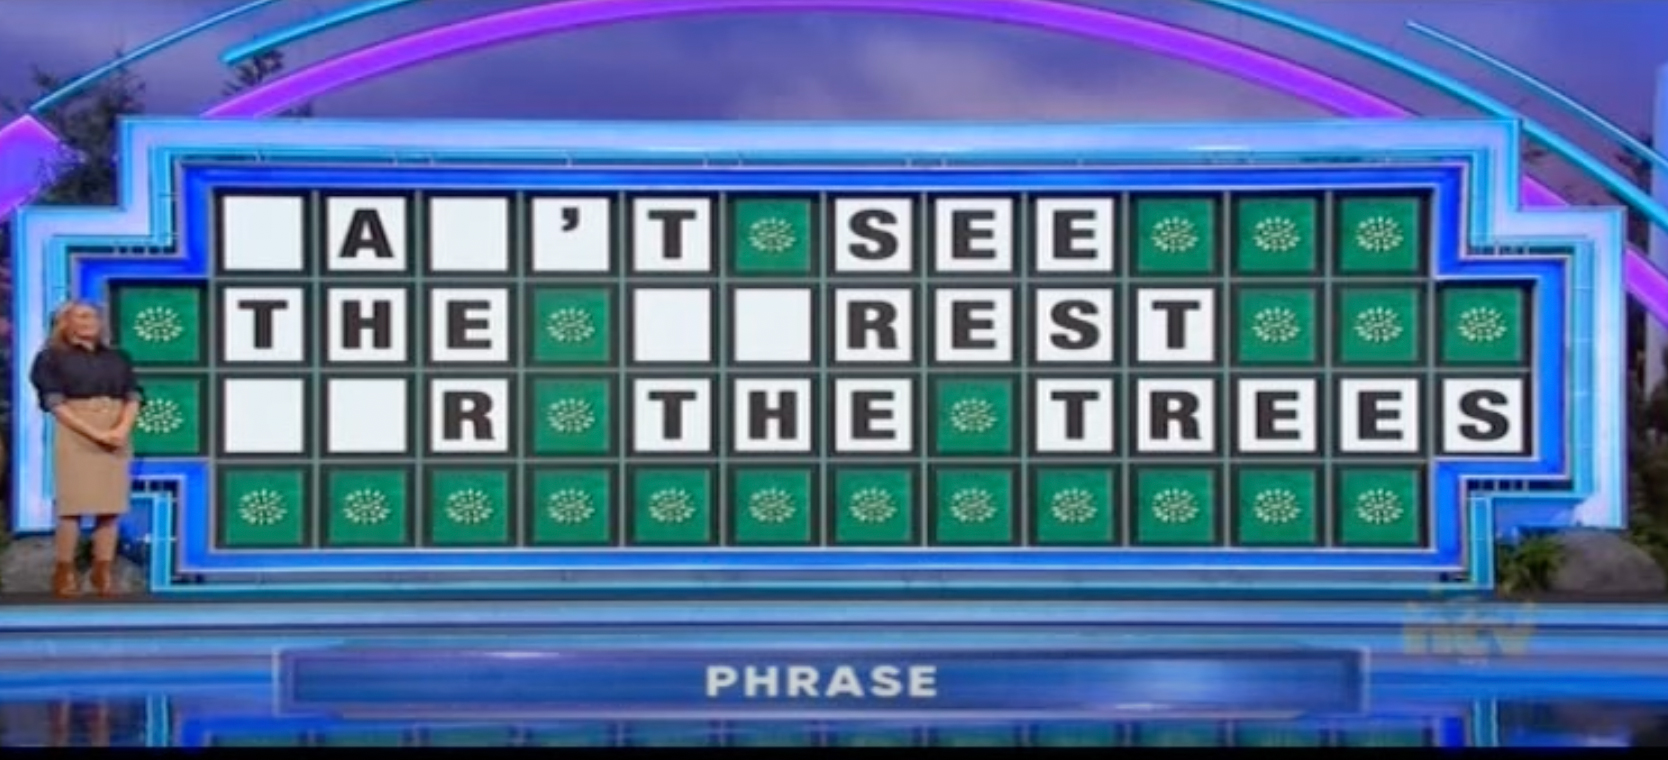 Last episode, Pat denied a contestant on this puzzle she correctly solved